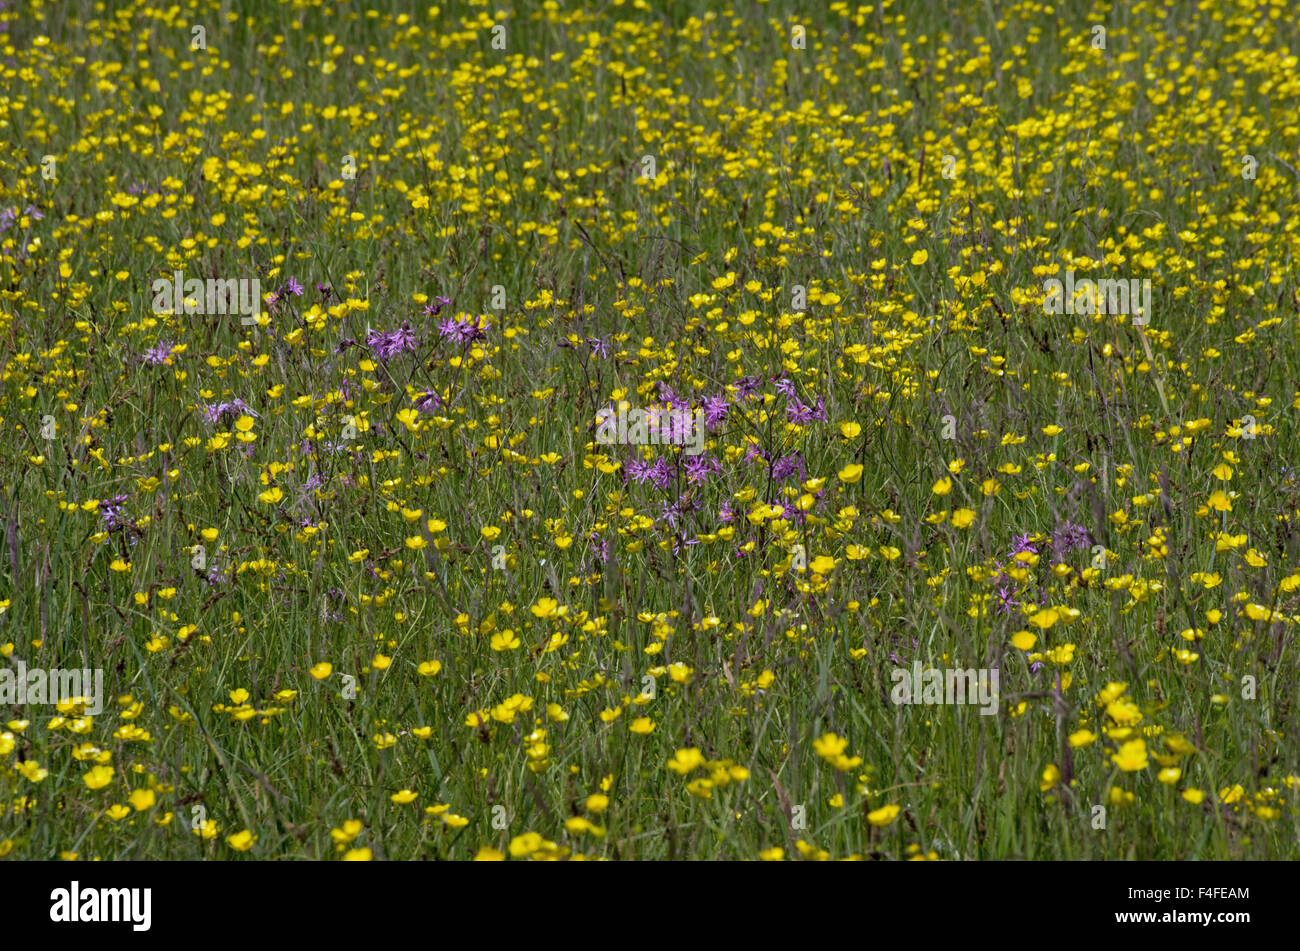 Wild Flower meadow Banque D'Images